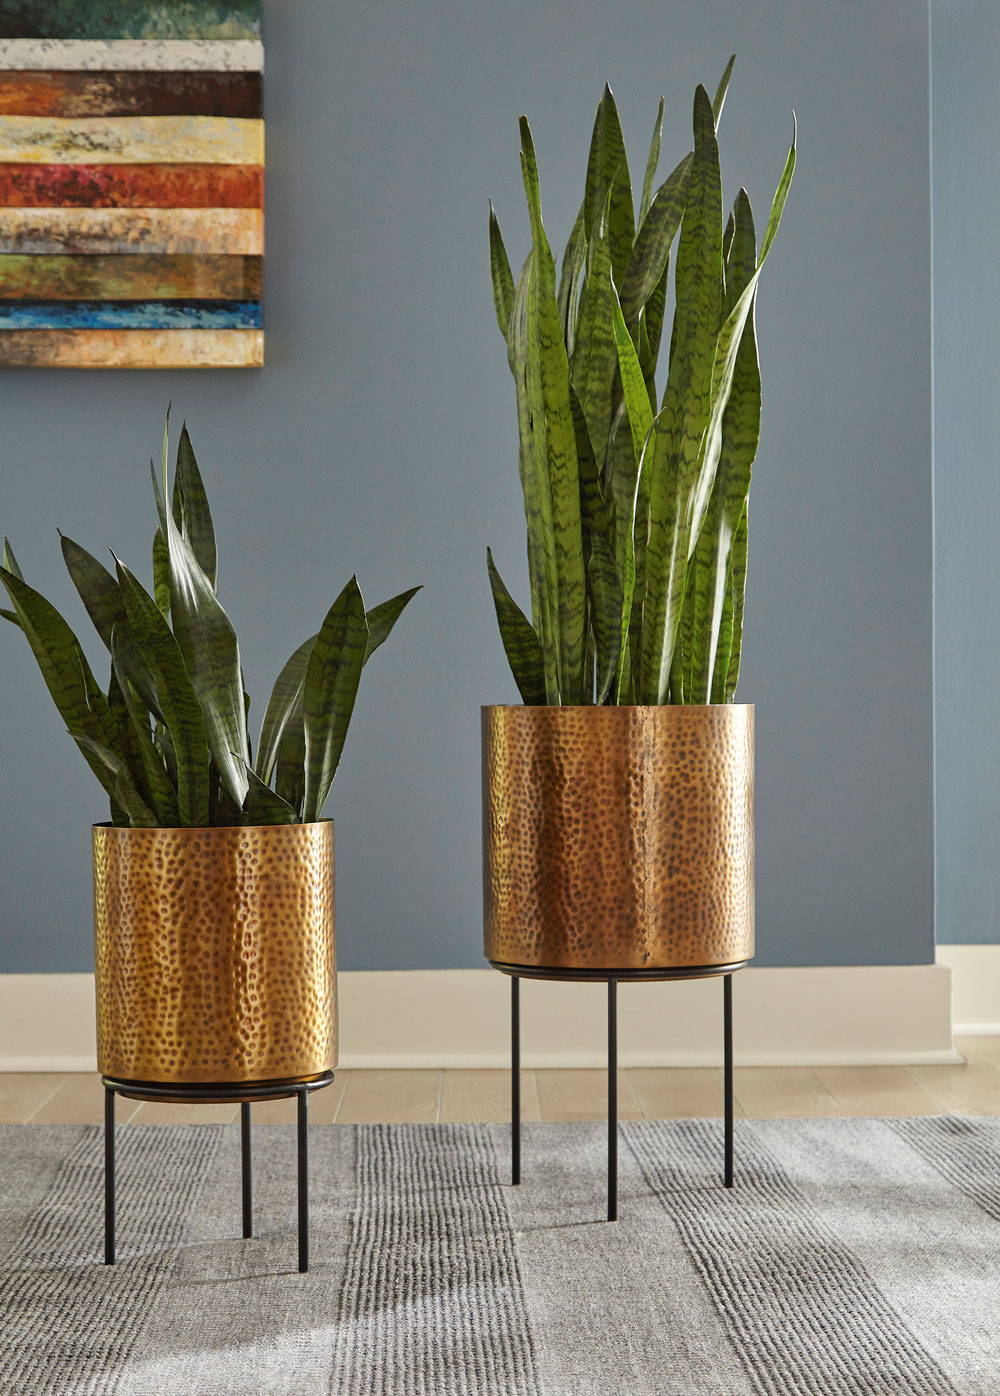 Copper plant pots on a grey area rug